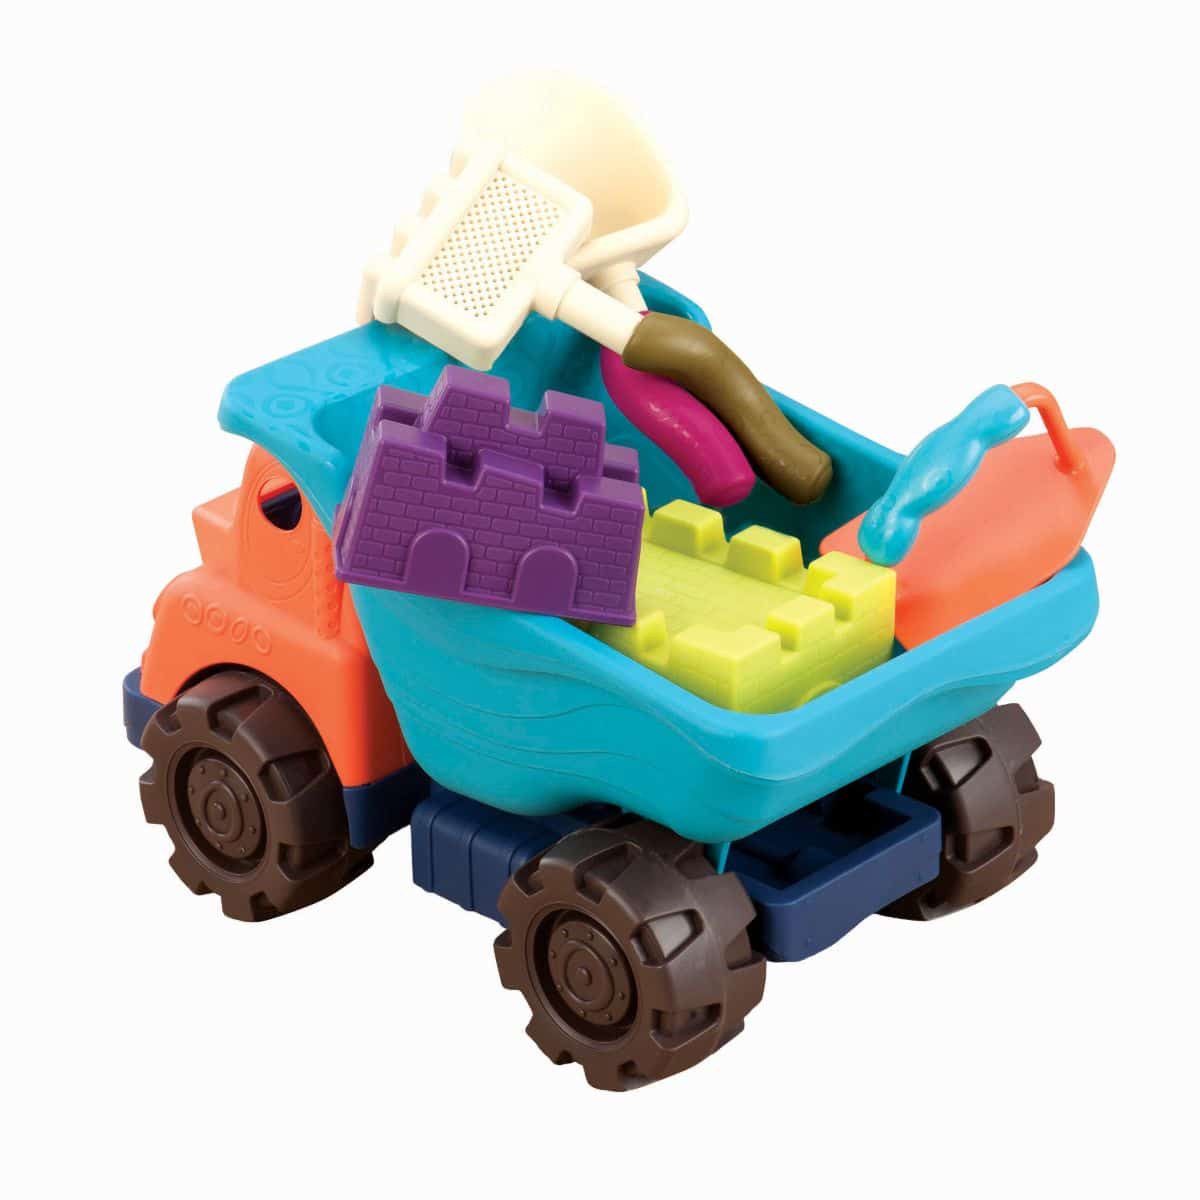 Dump truck and sand toys